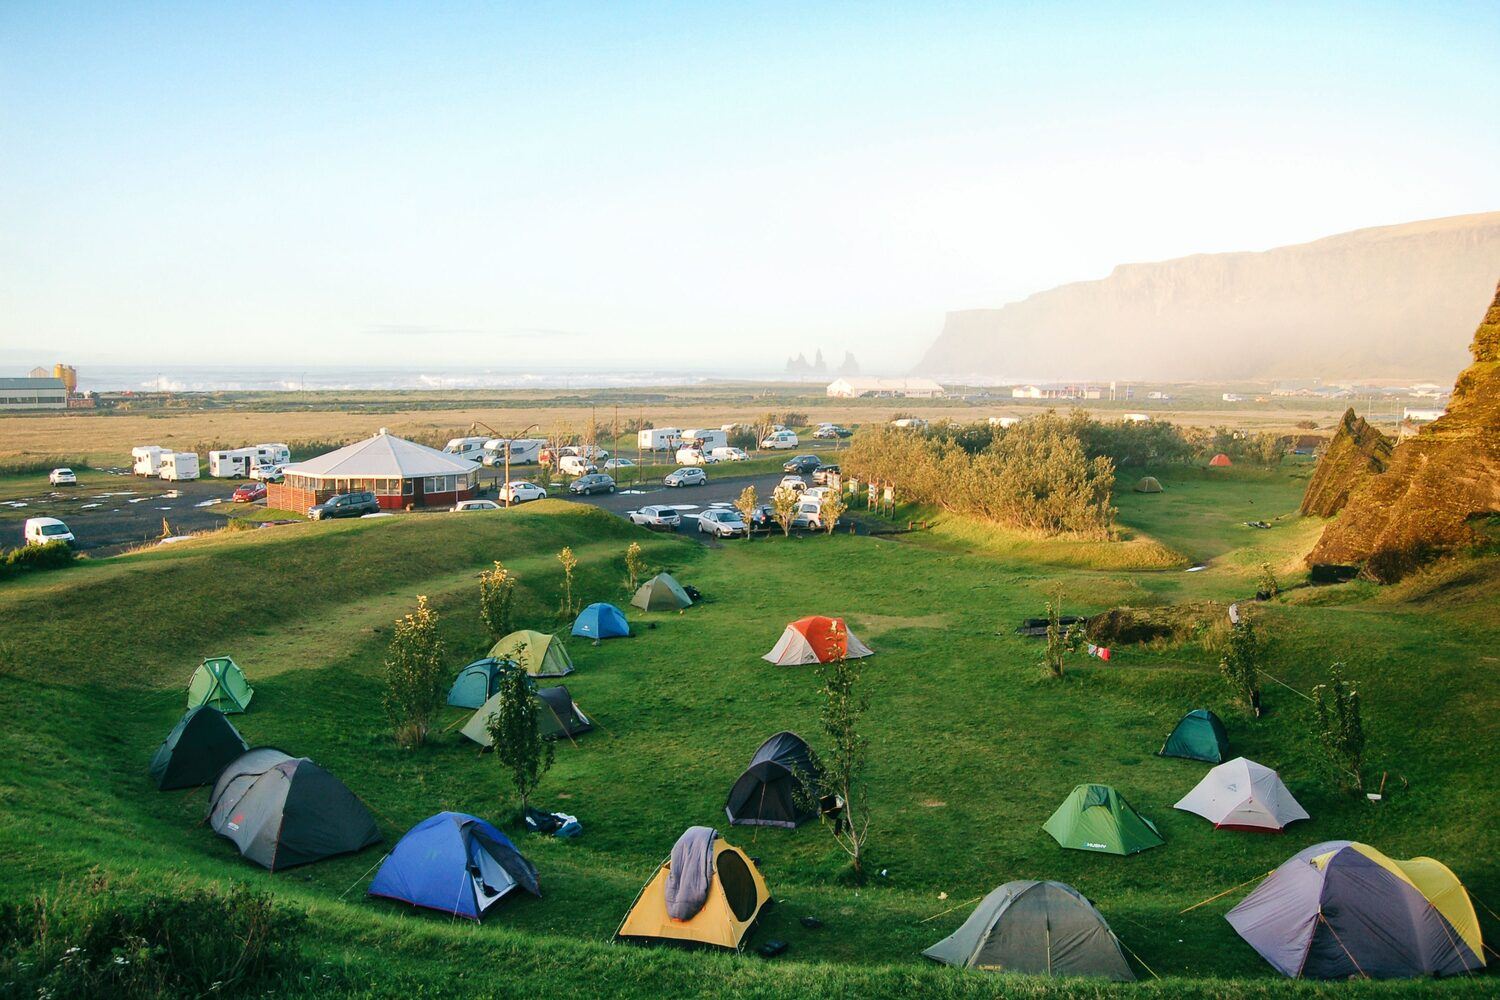 Camping site with multi colored tents set up in green field on summer's evening.